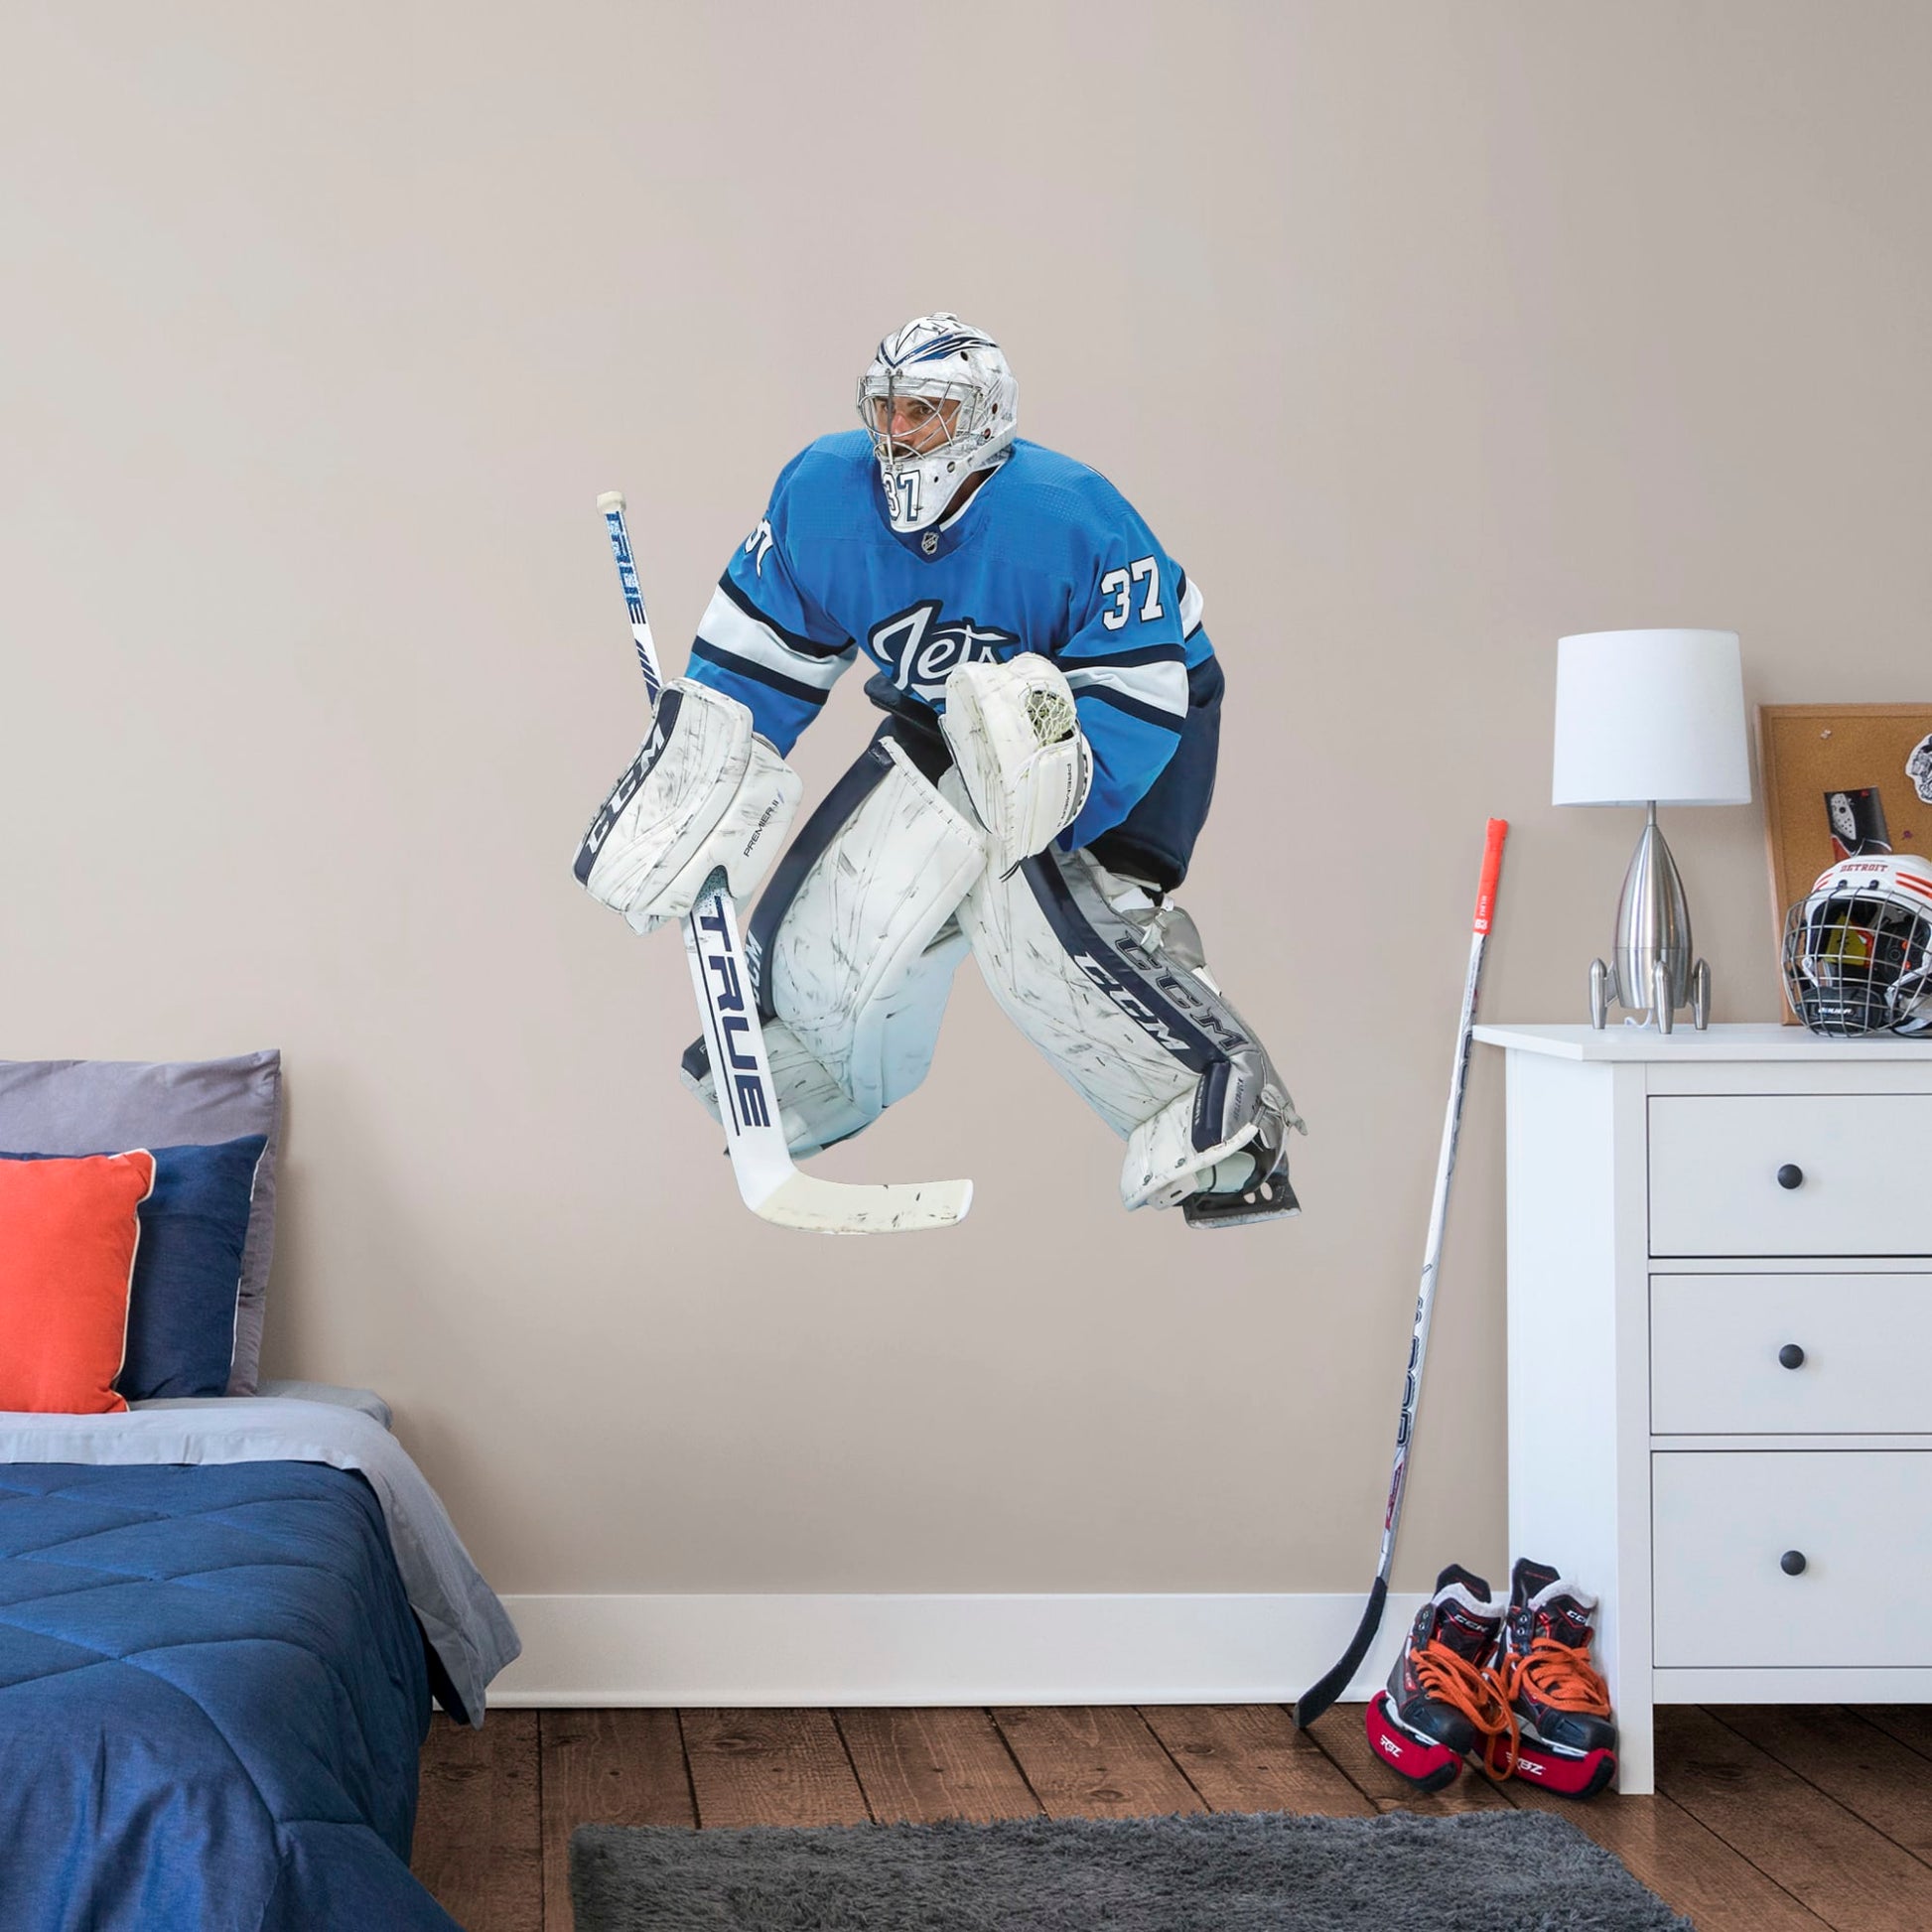 Giant Athlete + 2 Decals (38"W x 47"H) Opposing teams should be worried when they see Connor Hellebuyck in the goal, and now you can bring his epic defense skills to life in your own home with this Officially Licensed NHL removable wall decal. Pictured here ready to stop any puck that comes his way, this wall decal of Hellebuyck will make the perfect addition to your bedroom, office, or fan room, and it even makes a great gift for your favorite Jets fanatic!